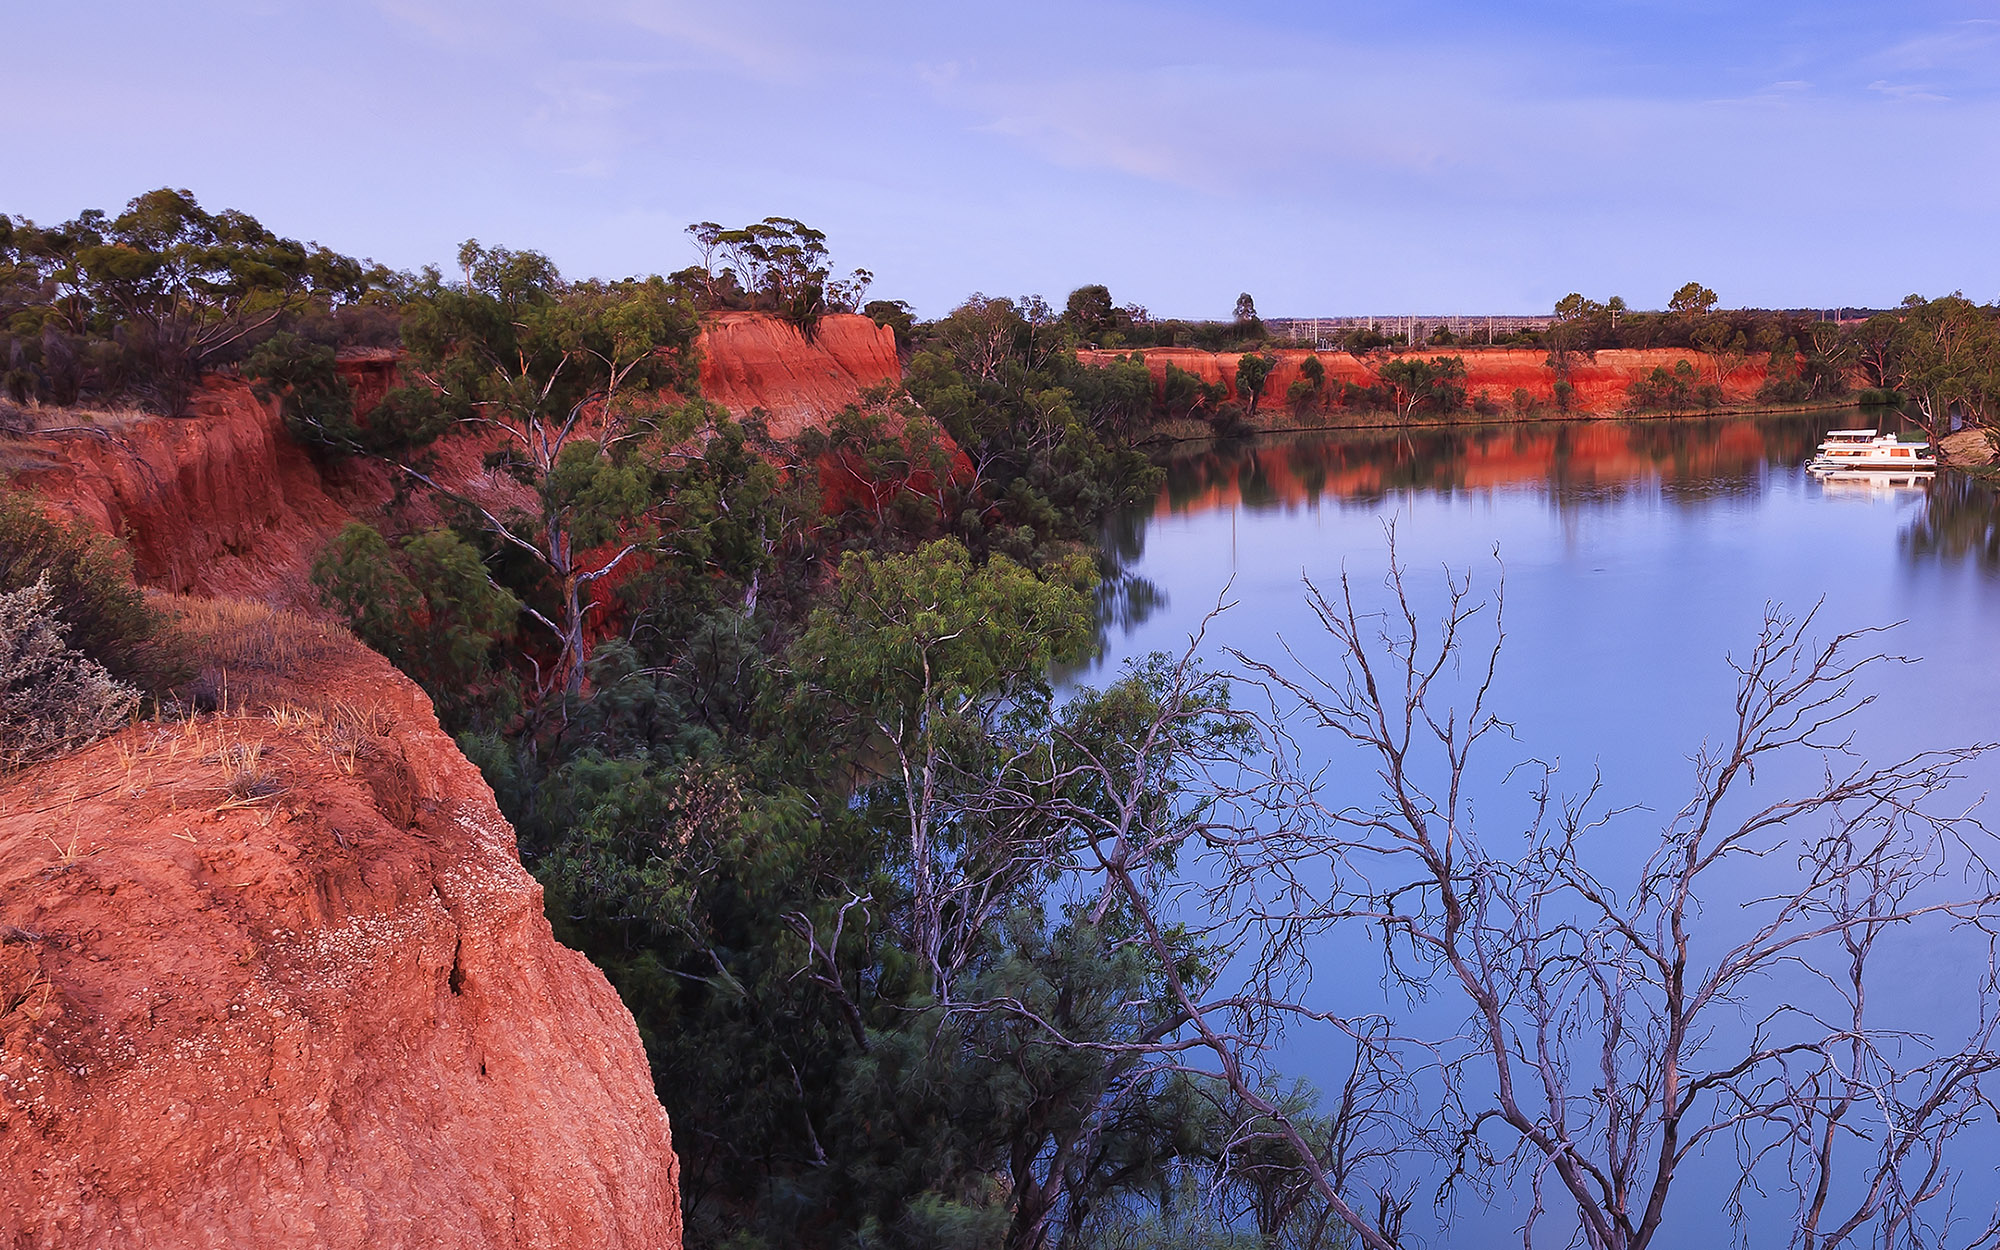 Red cliffs of Murray river on the border between Victoria and New South Wales states of Australia. Elevated red bank of the river overlooks river bend with cruise ship at sunset.